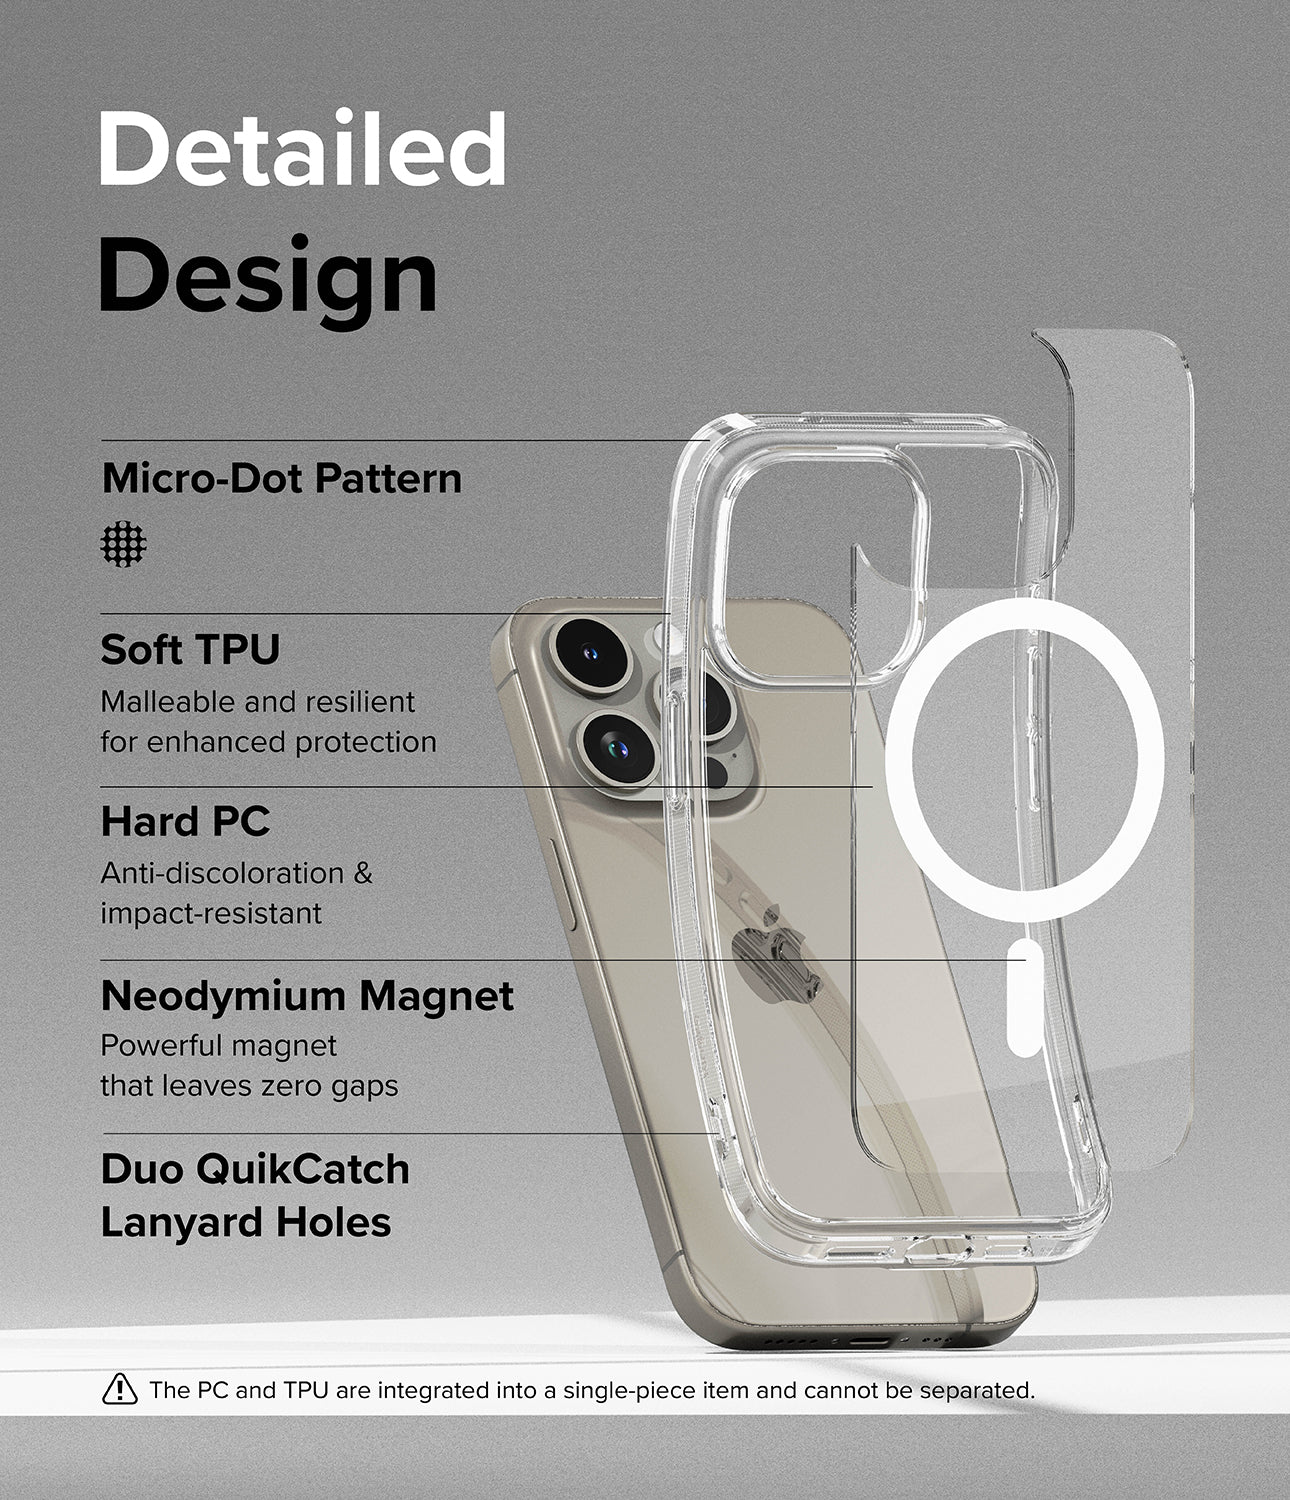 iPhone 15 Pro Case | Fusion Magnetic - Detailed Design. Micro-Dot Pattern. Malleable and resilient for enhanced protection with Soft TPU. Anti-discoloration and impact-resistant with Hard PC. Neodymium Magnet for powerful magnet that leaves zero gaps. Duo QuikCatch Lanyard Holes.